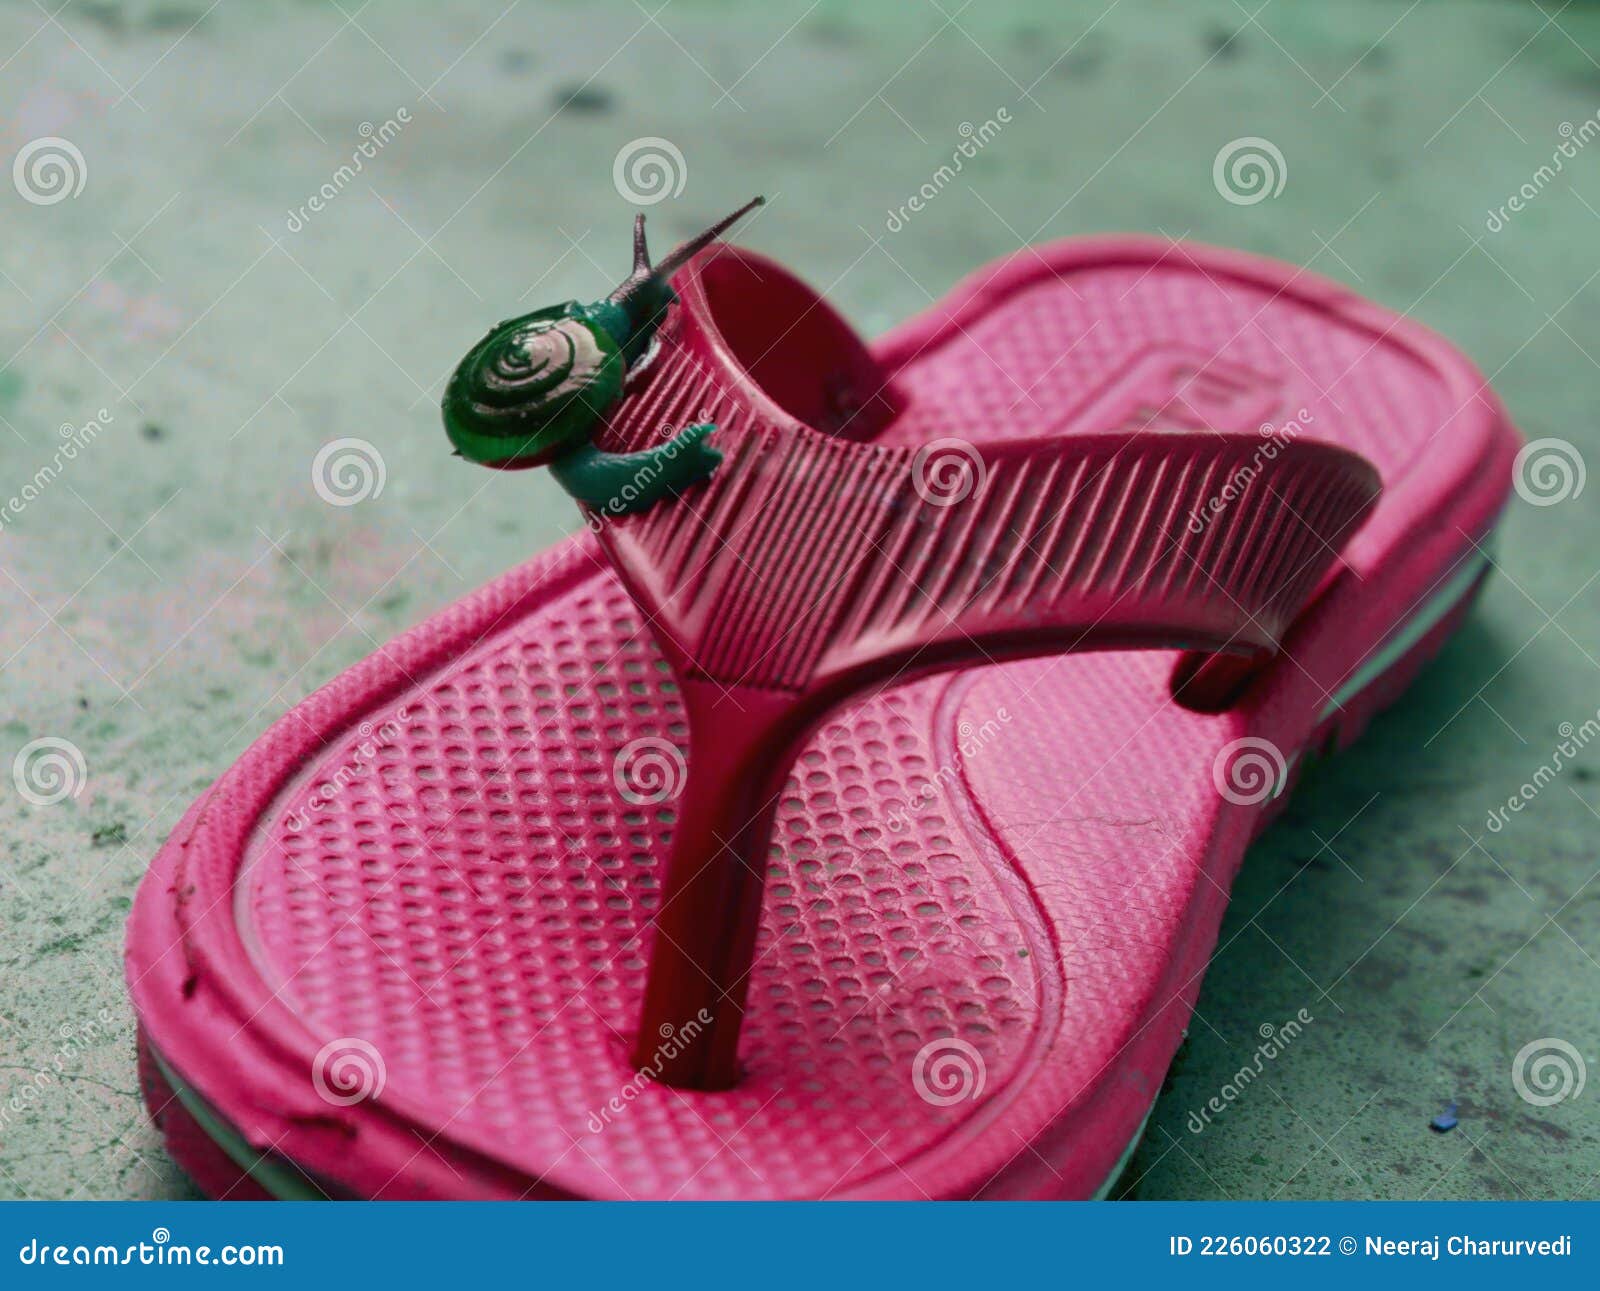 Snail Water Insect Climbing on Feet Sleeper Stock Photo - Image of ...